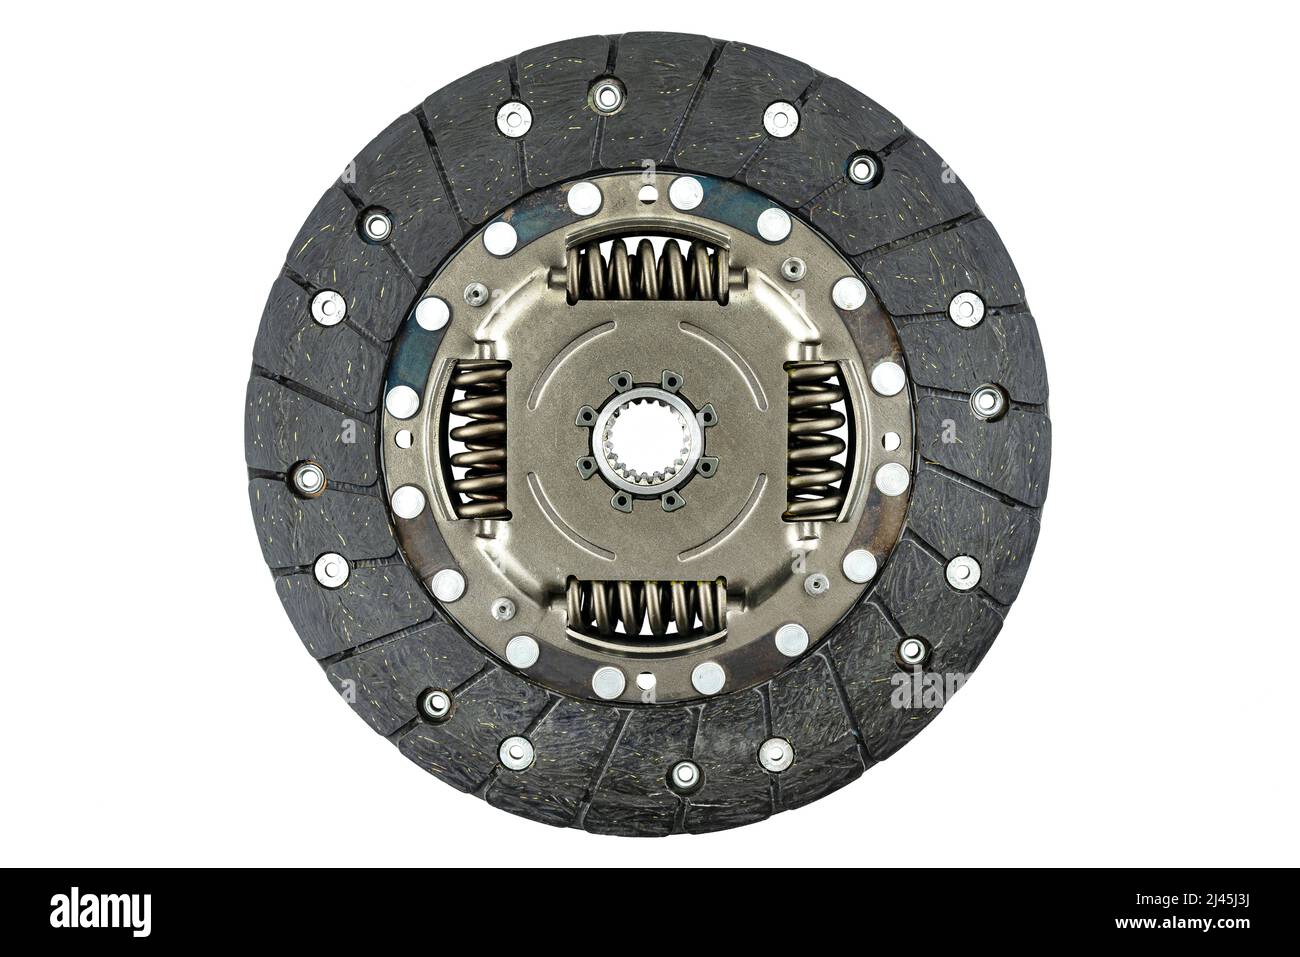 Used car clutch with damper springs and friction linings, isolated on a white background, top view. Stock Photo